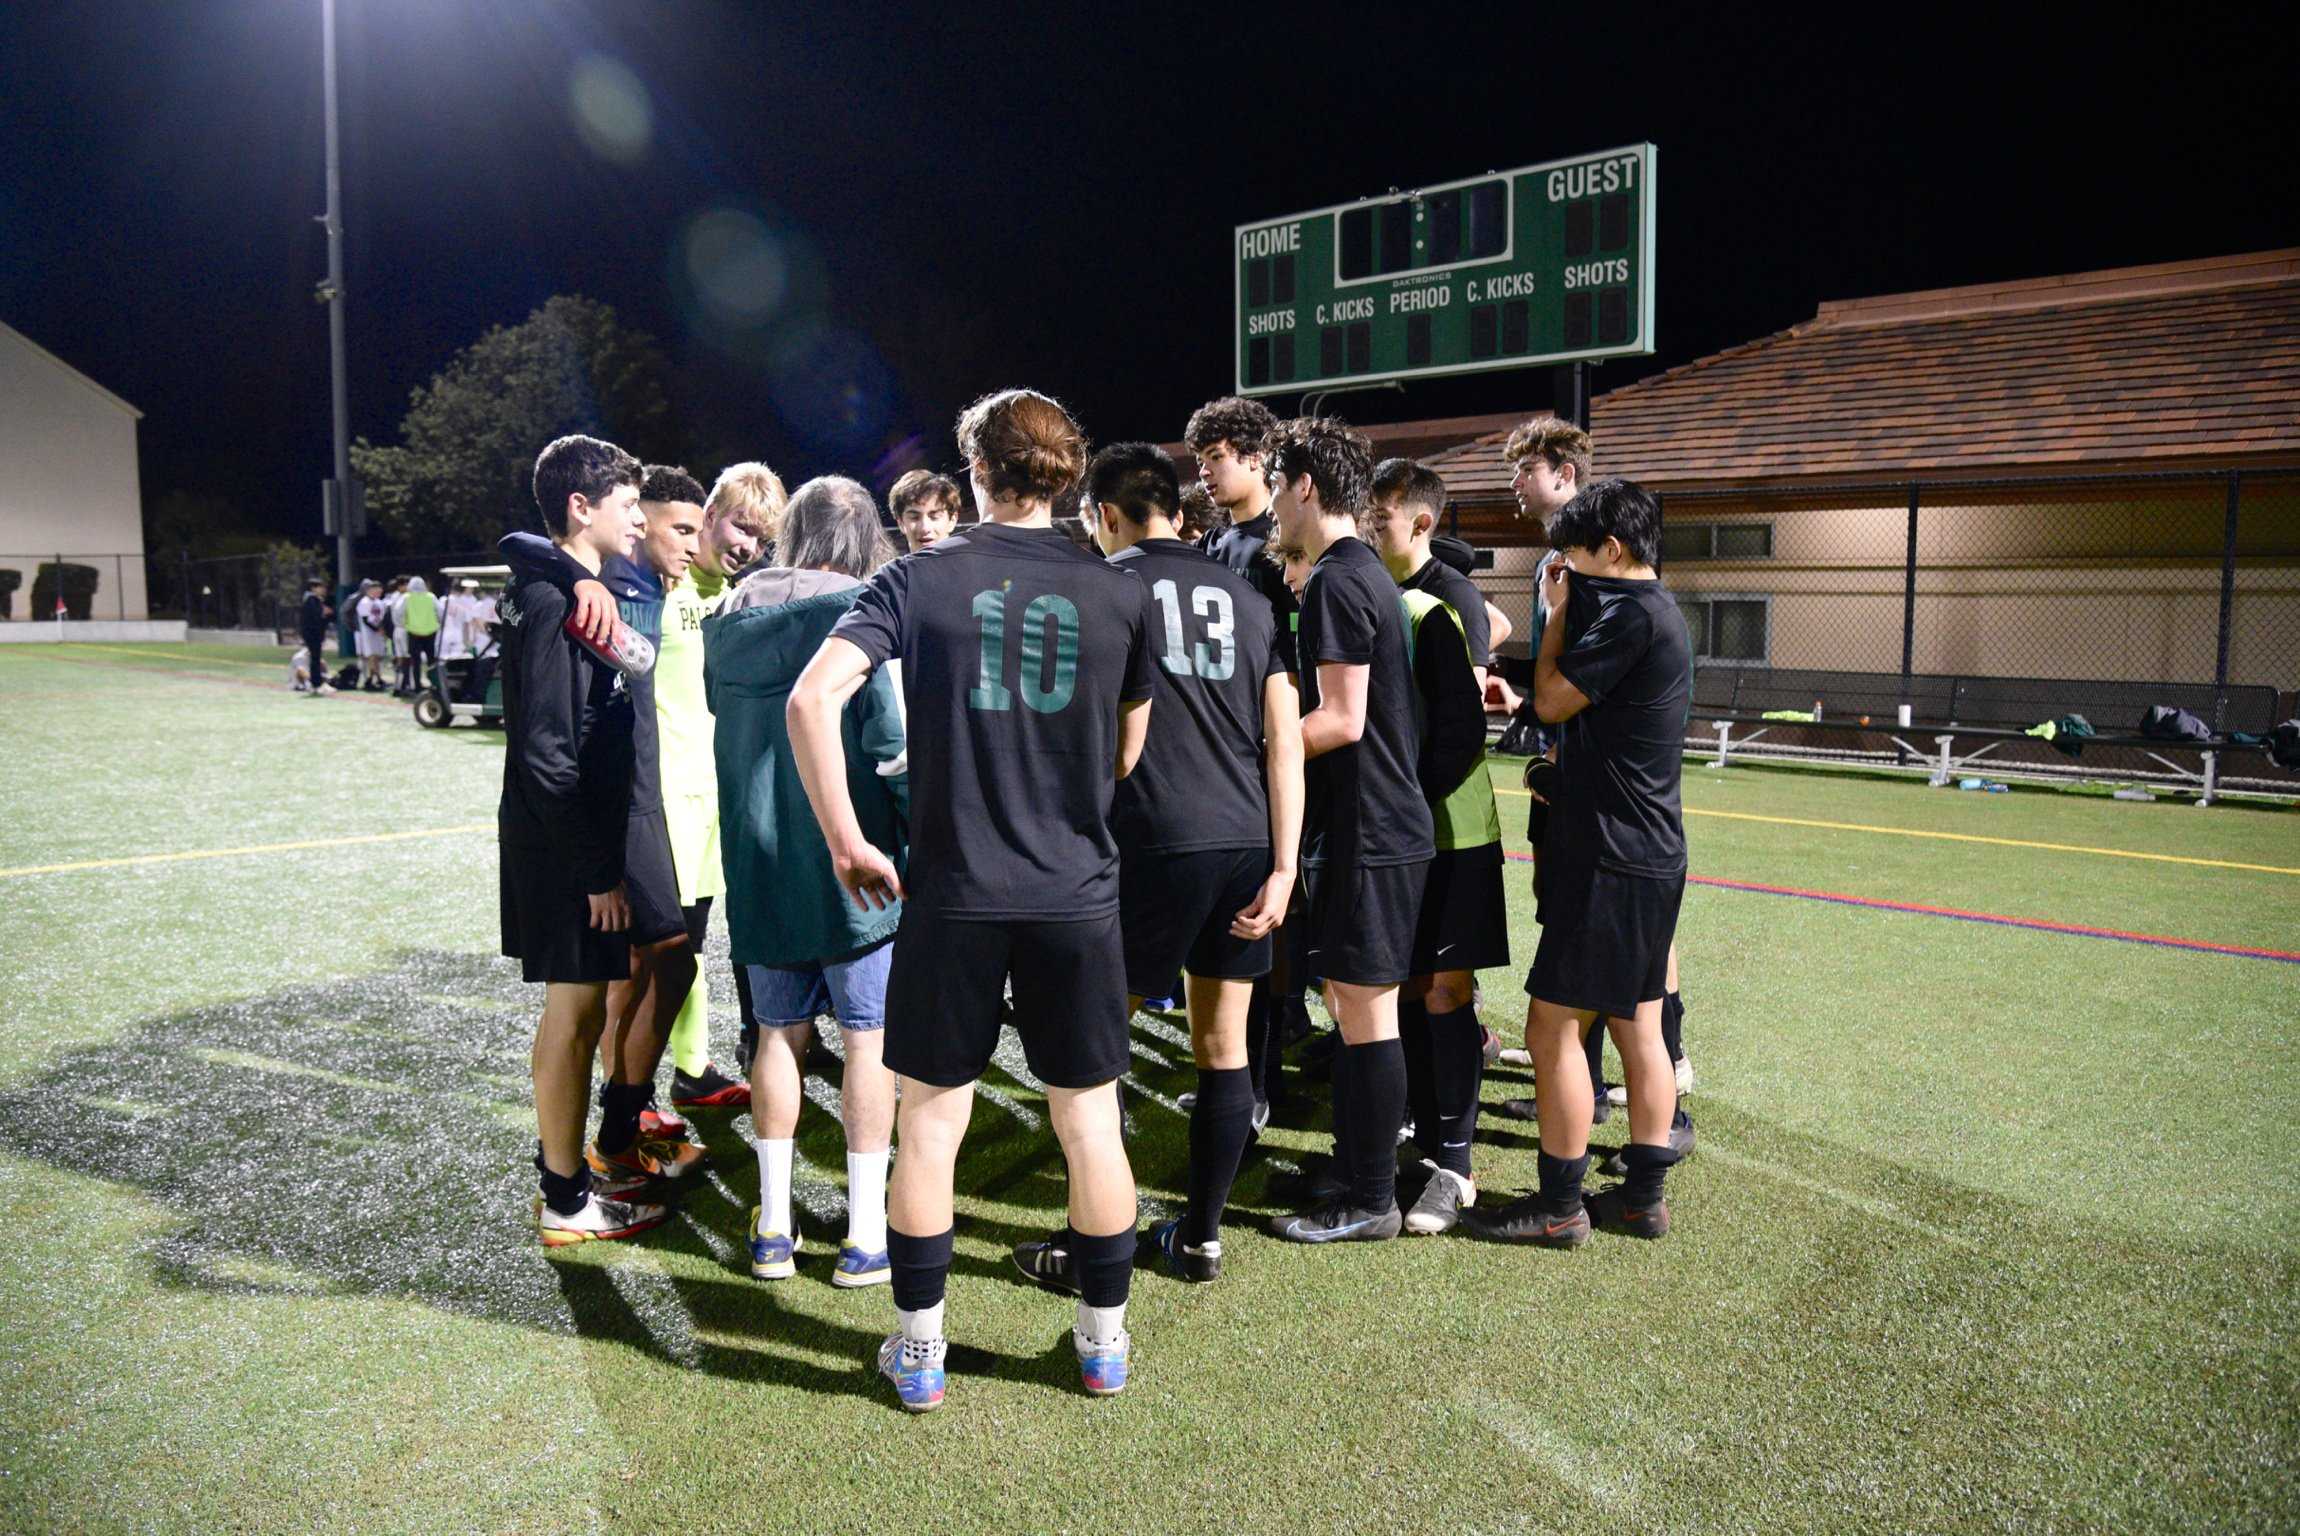 The boys soccer team huddles on the field after its 2-1 victory against Gunn High School on Feb. 16. Photo by Emily Yao